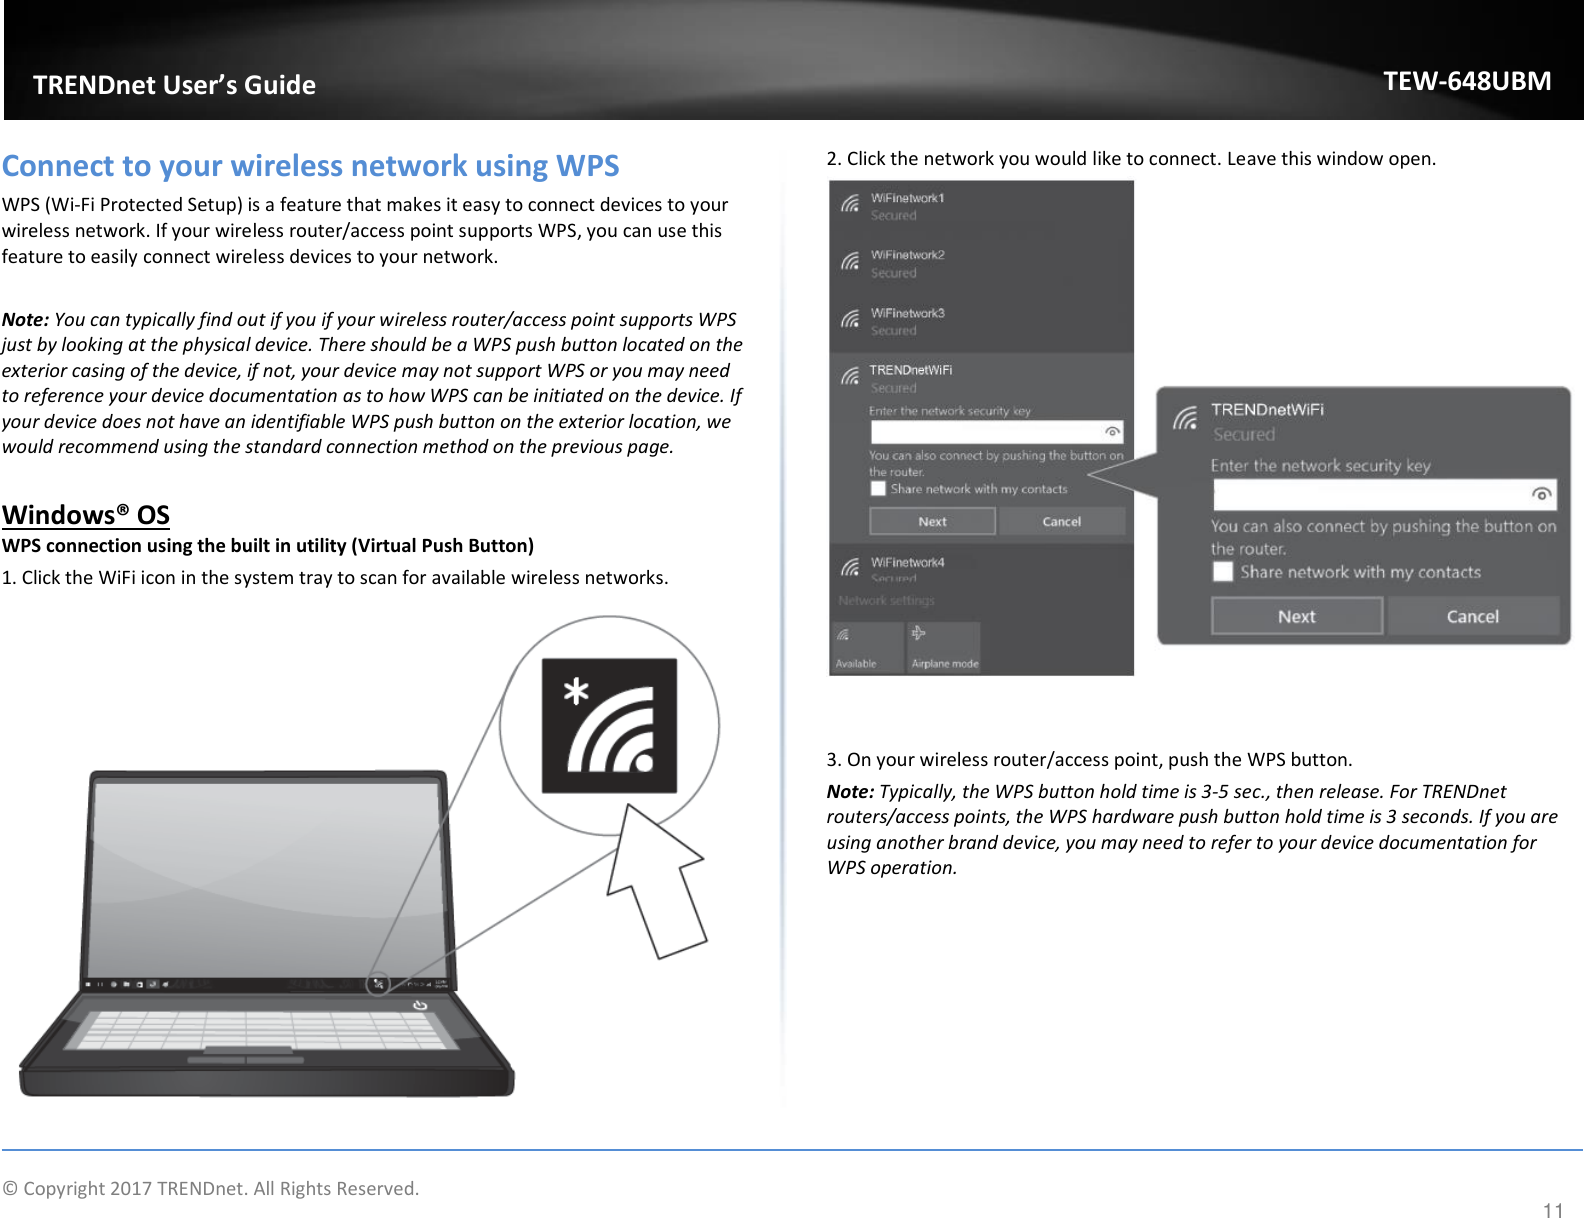                    © Copyright 2017 TRENDnet. All Rights Reserved.      11  TRENDnet User’s Guide TEW-648UBM Connect to your wireless network using WPS WPS (Wi-Fi Protected Setup) is a feature that makes it easy to connect devices to your wireless network. If your wireless router/access point supports WPS, you can use this feature to easily connect wireless devices to your network.   Note: You can typically find out if you if your wireless router/access point supports WPS just by looking at the physical device. There should be a WPS push button located on the exterior casing of the device, if not, your device may not support WPS or you may need to reference your device documentation as to how WPS can be initiated on the device. If your device does not have an identifiable WPS push button on the exterior location, we would recommend using the standard connection method on the previous page.  Windows® OS WPS connection using the built in utility (Virtual Push Button) 1. Click the WiFi icon in the system tray to scan for available wireless networks.   2. Click the network you would like to connect. Leave this window open.     3. On your wireless router/access point, push the WPS button.  Note: Typically, the WPS button hold time is 3-5 sec., then release. For TRENDnet routers/access points, the WPS hardware push button hold time is 3 seconds. If you are using another brand device, you may need to refer to your device documentation for WPS operation.  